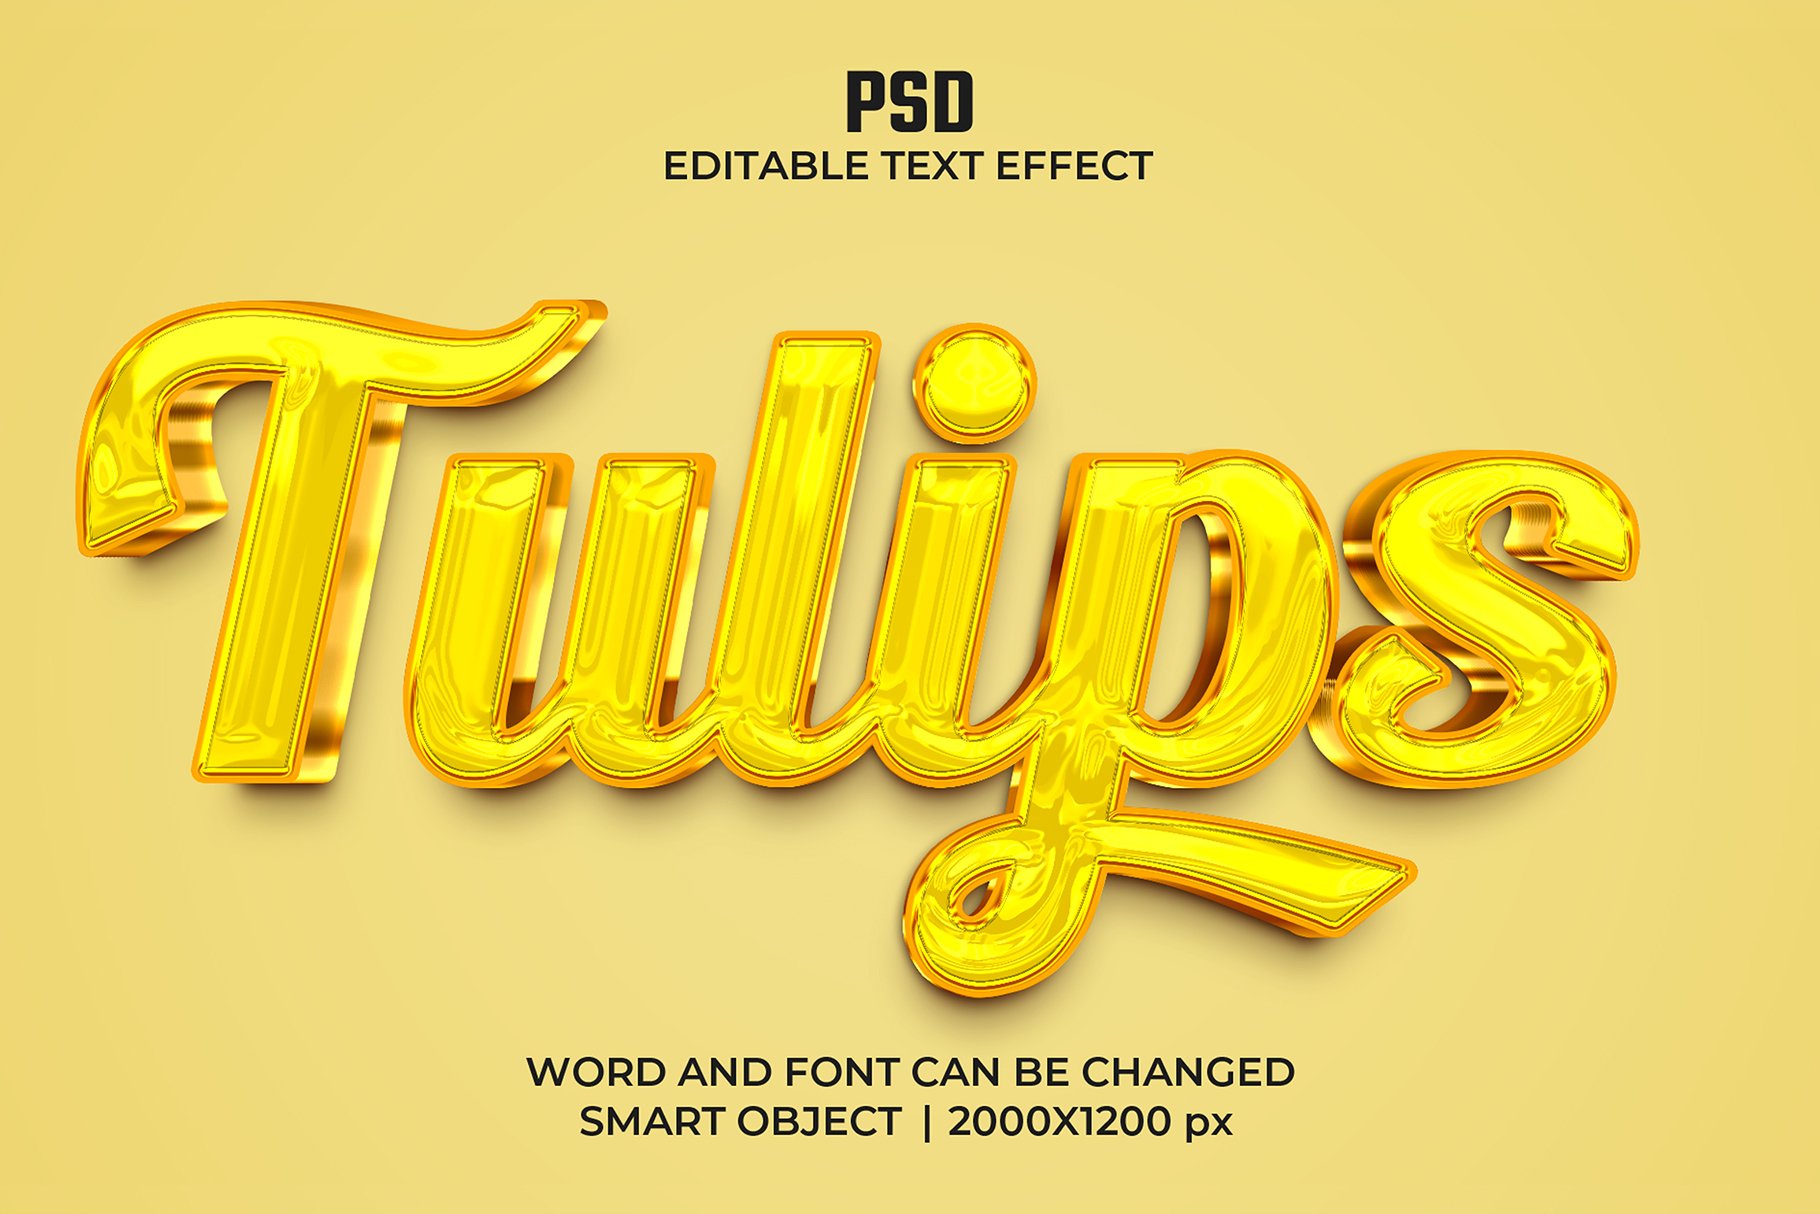 Tulips 3d Editable Text Effect Stylecover image.